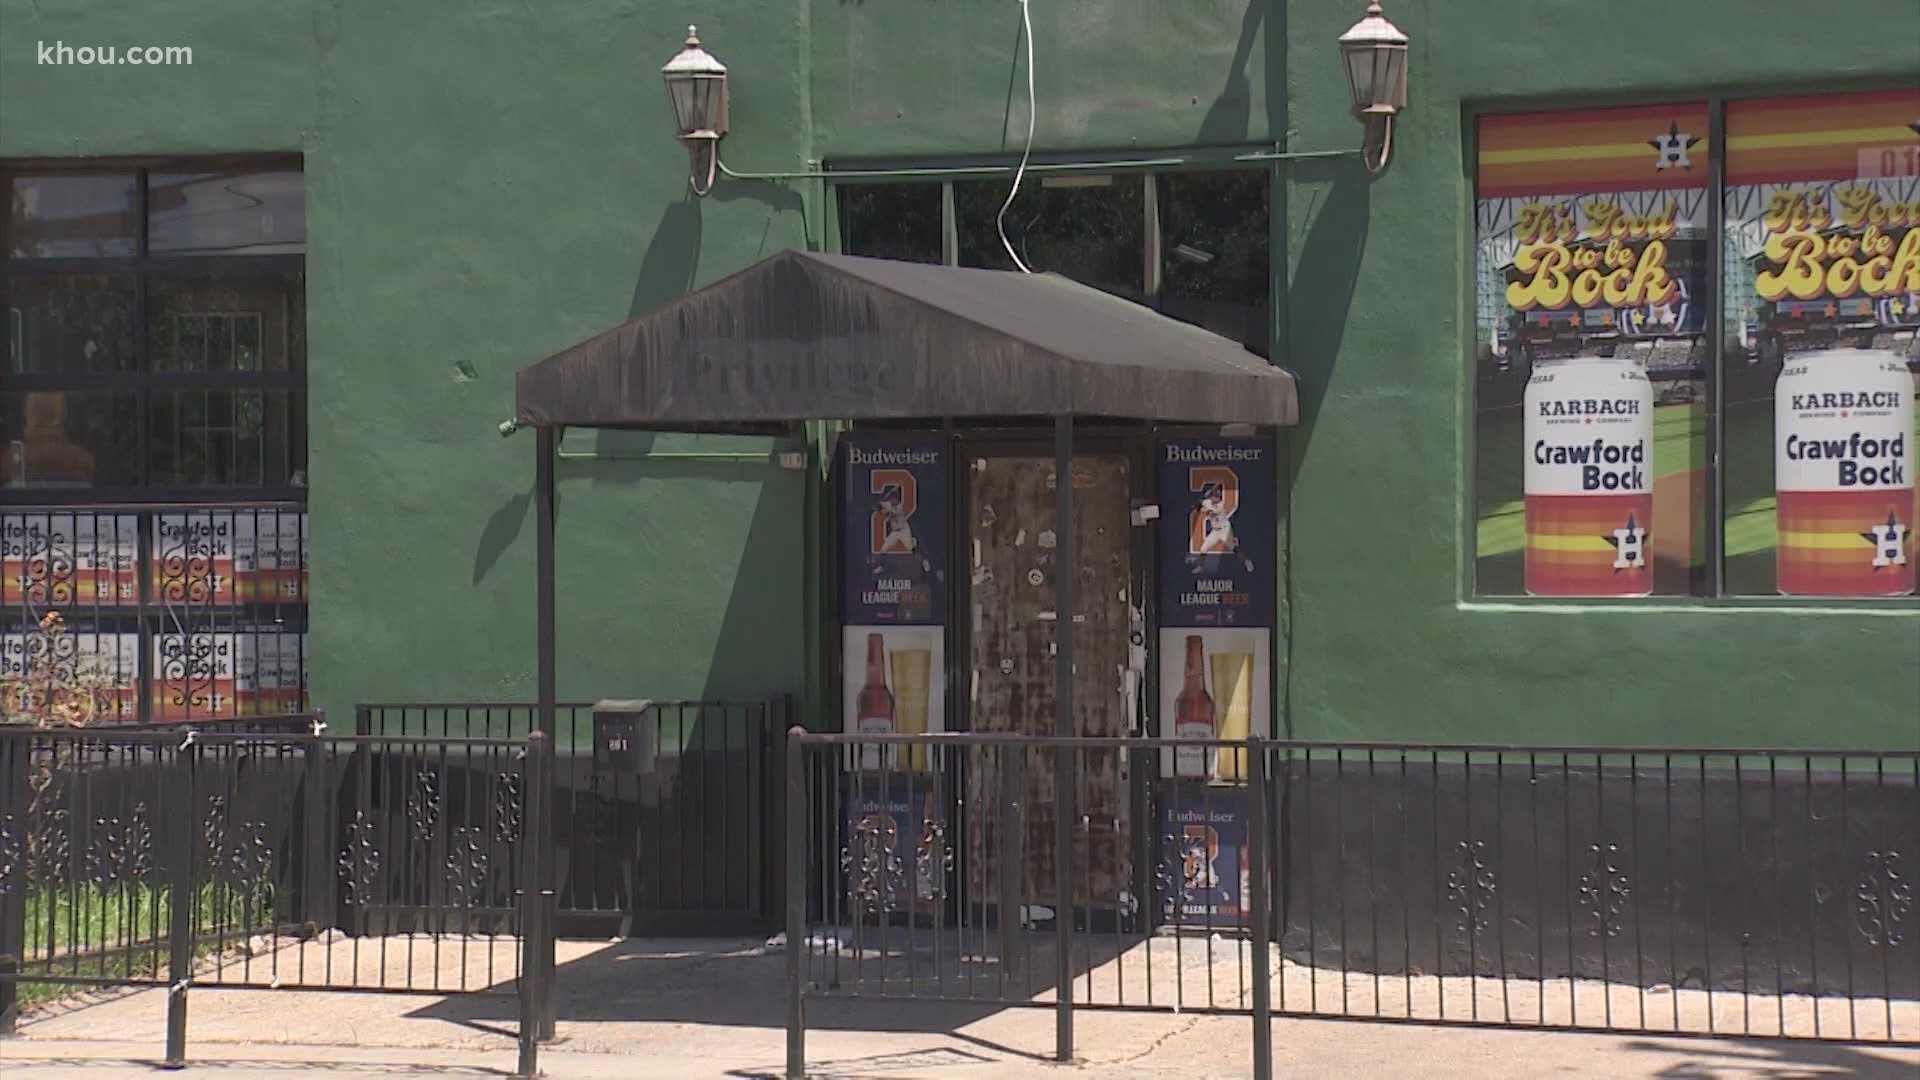 Friday would normally mean a packed house for HTX Fan Tavern. But this year, they’re completely closed.